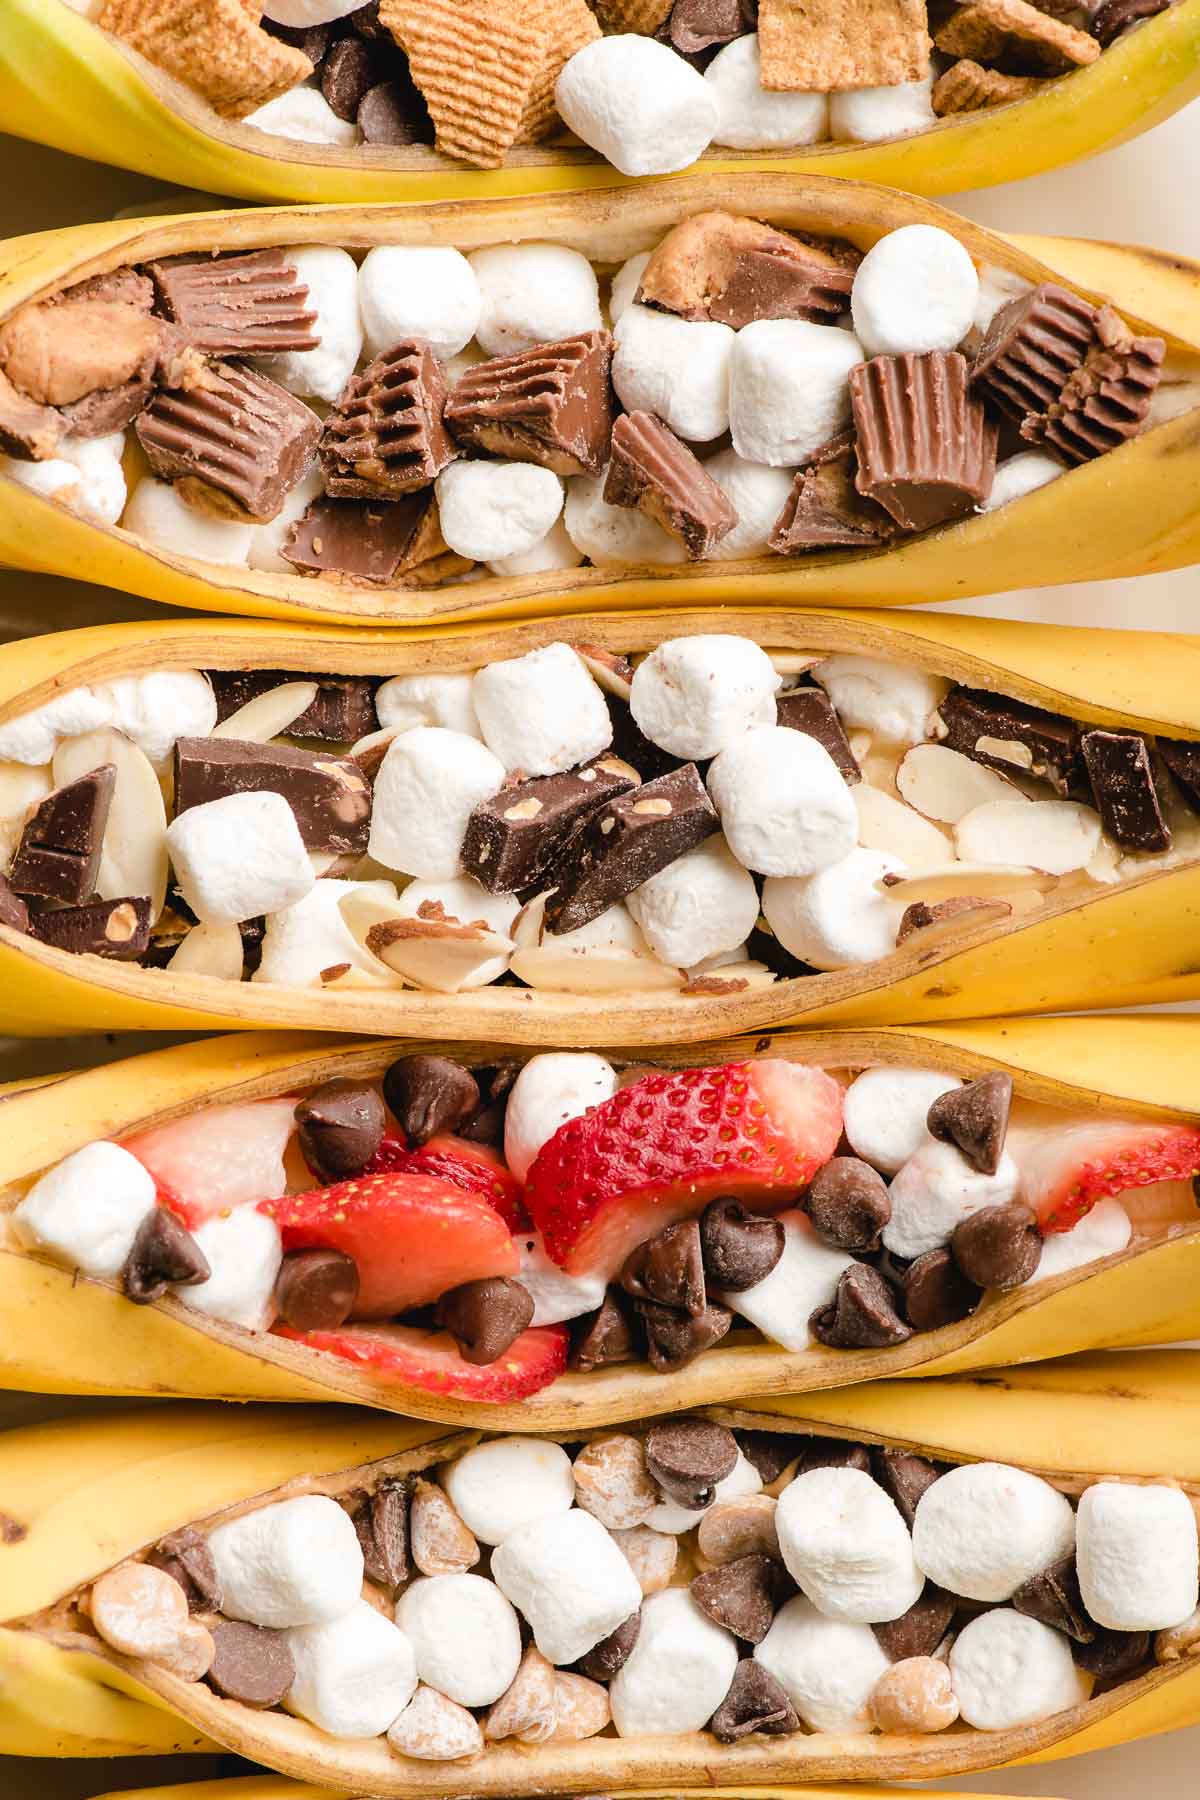 Bananas sliced open and stuffed with marshmallows, chocolate chips, reeses, and strawberries.